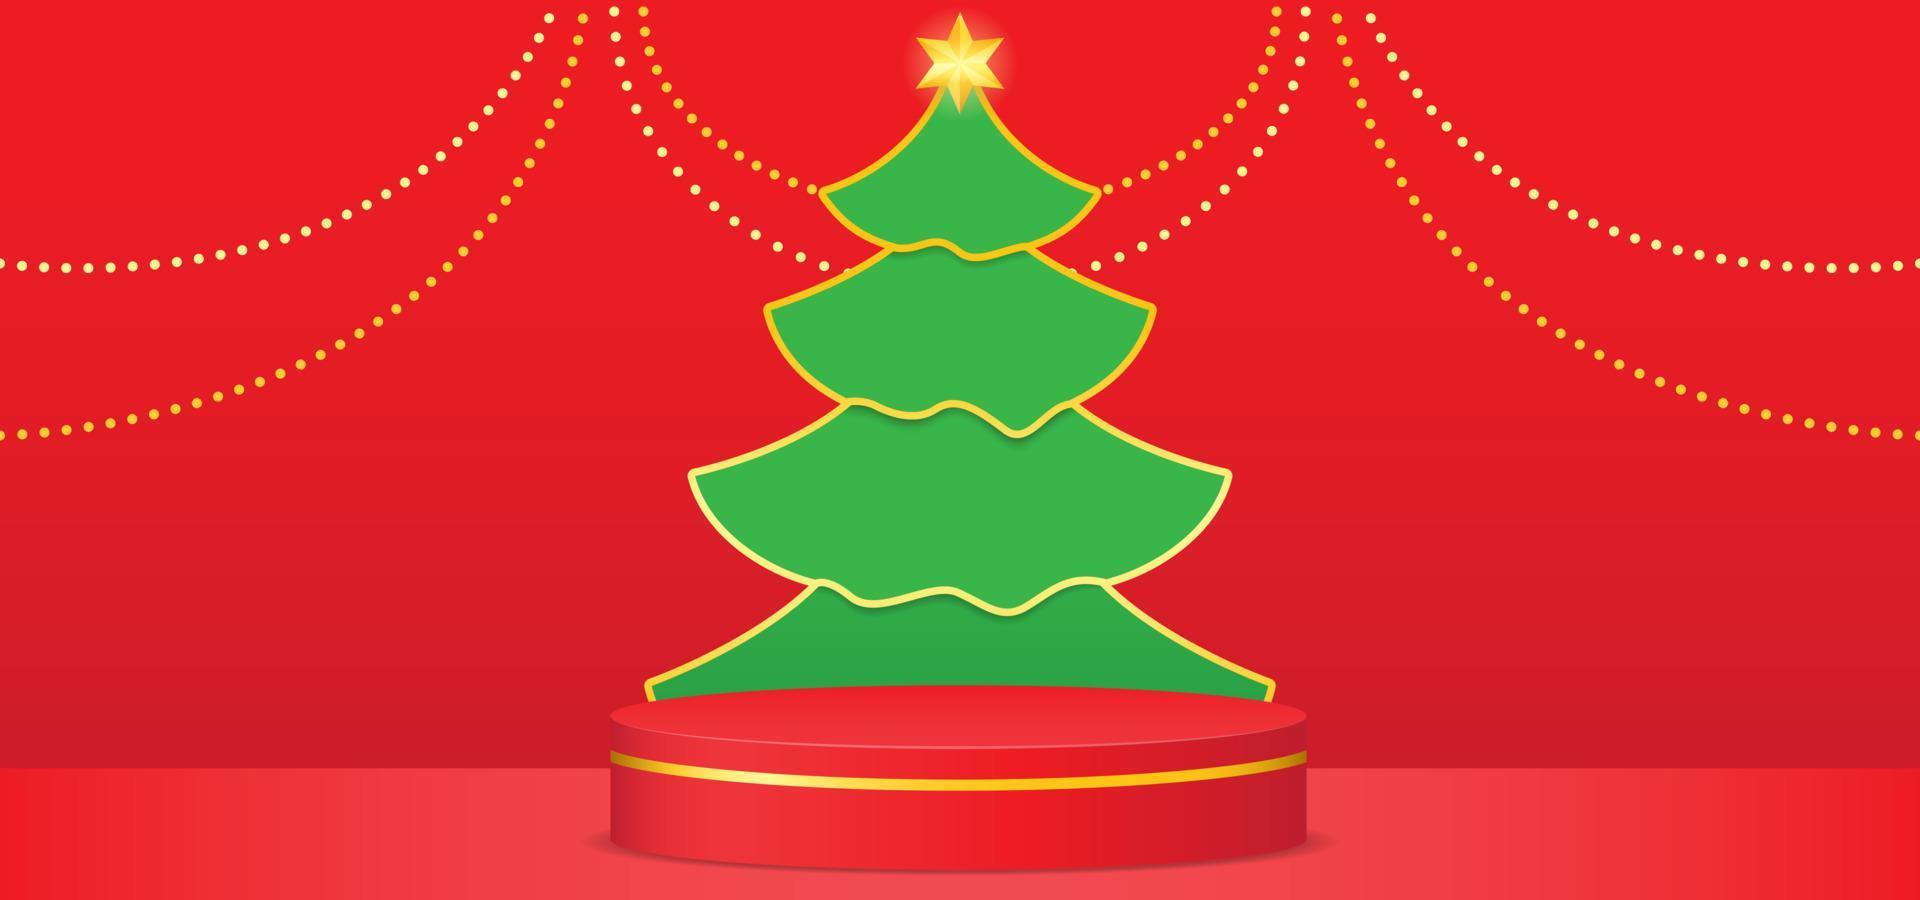 Christmas tree with red podium and gold ball decorations. Vector background with papercut style